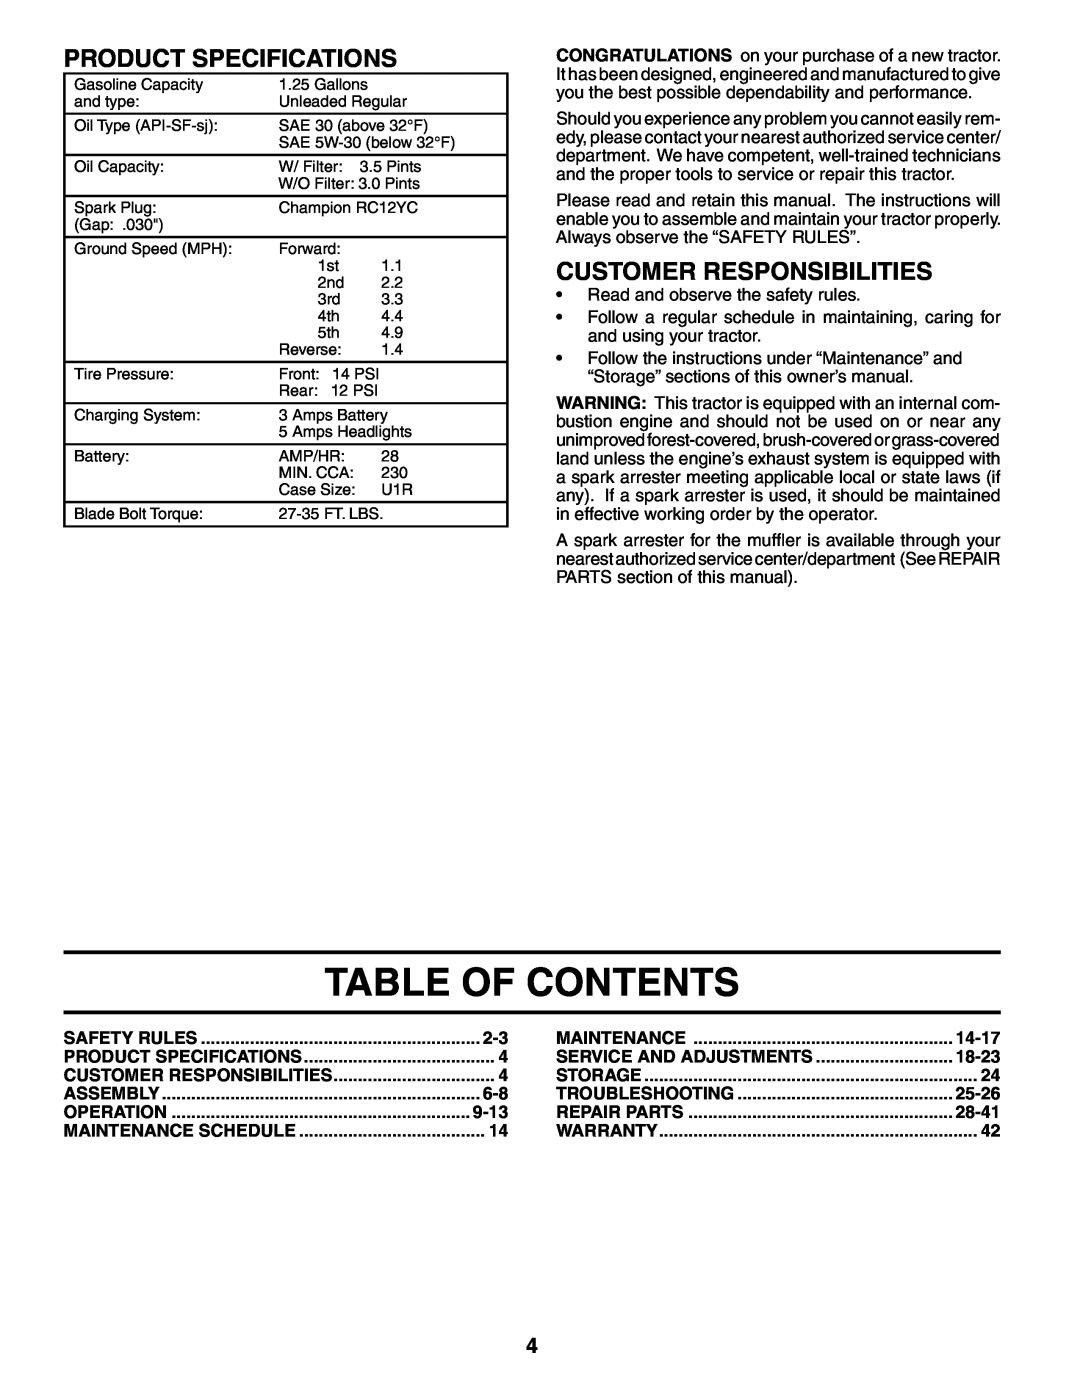 Poulan 188695 manual Table Of Contents, Product Specifications, Customer Responsibilities, 9-13, 14-17, 18-23, 25-26, 28-41 